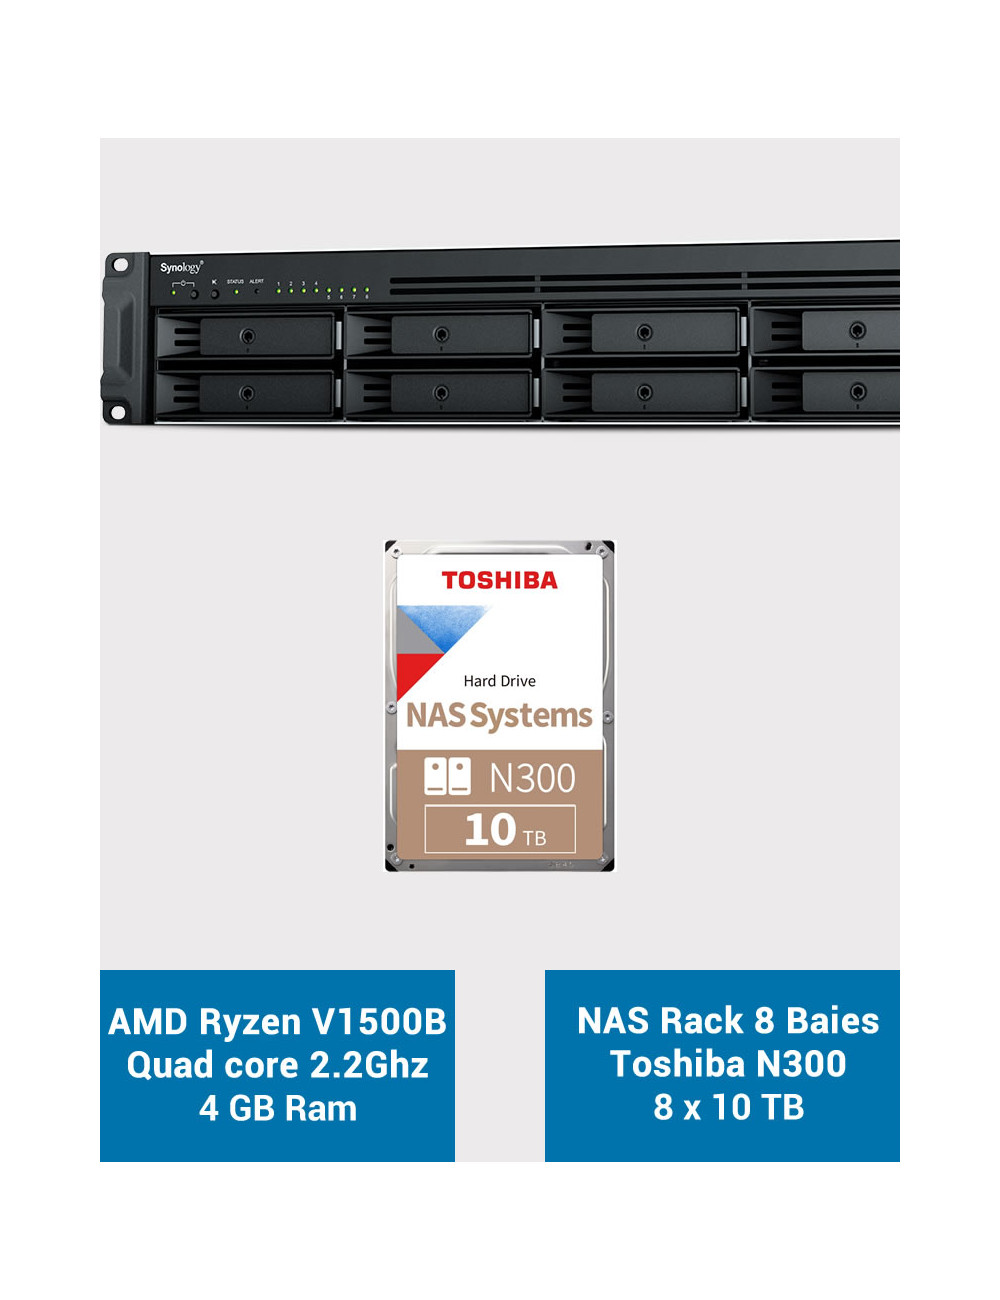 Synology RS1221+ Serveur NAS Rack Toshiba N300 80To (8x10To)